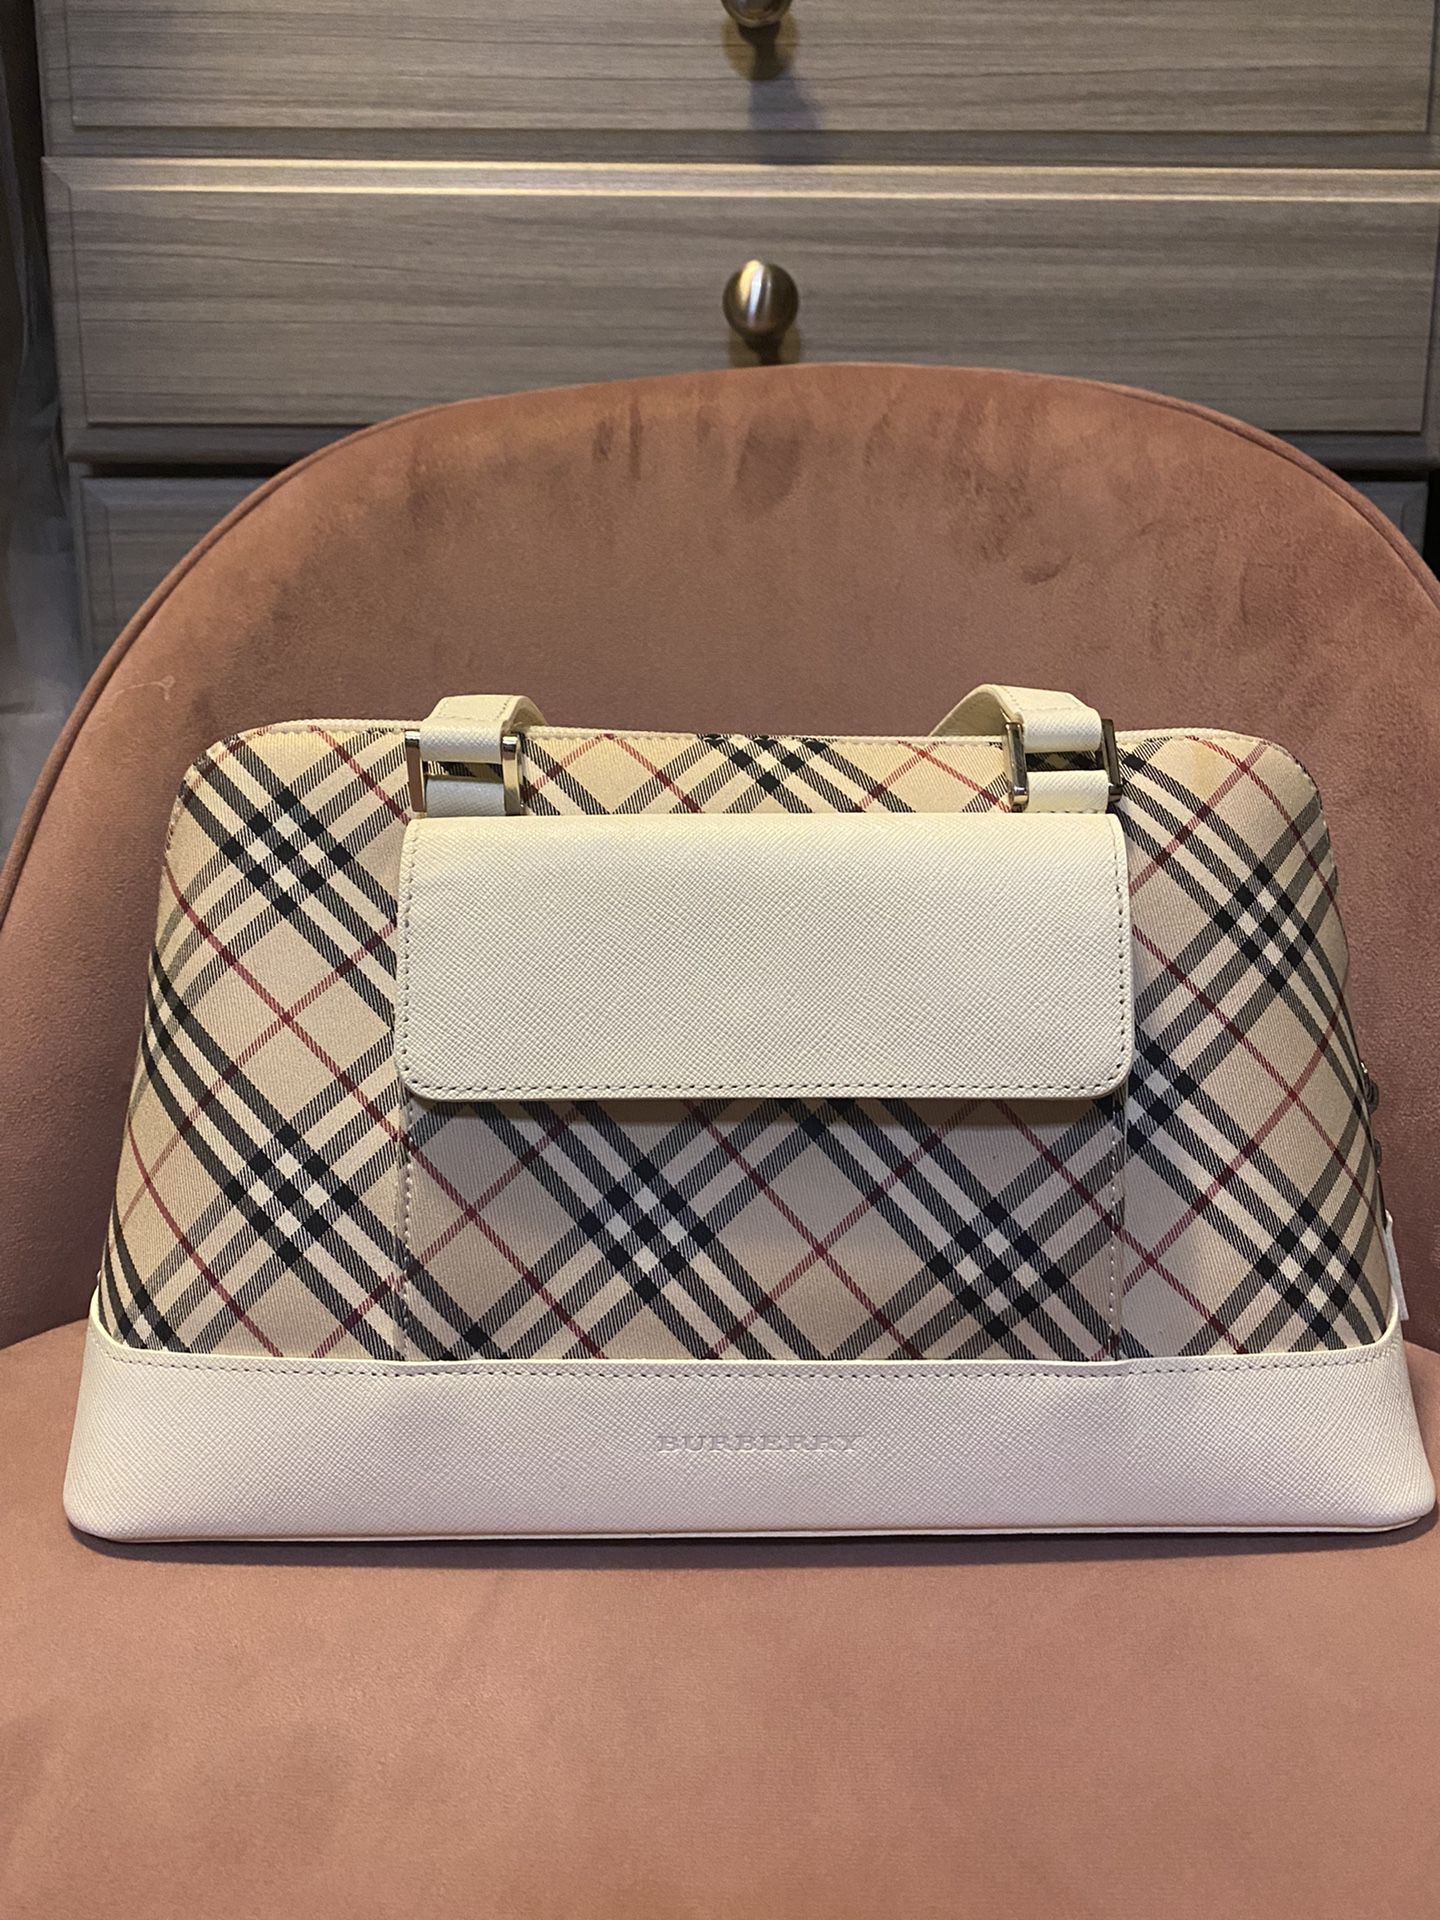 Small Authentic Burberry Crossbody for Sale in Spanaway, WA - OfferUp